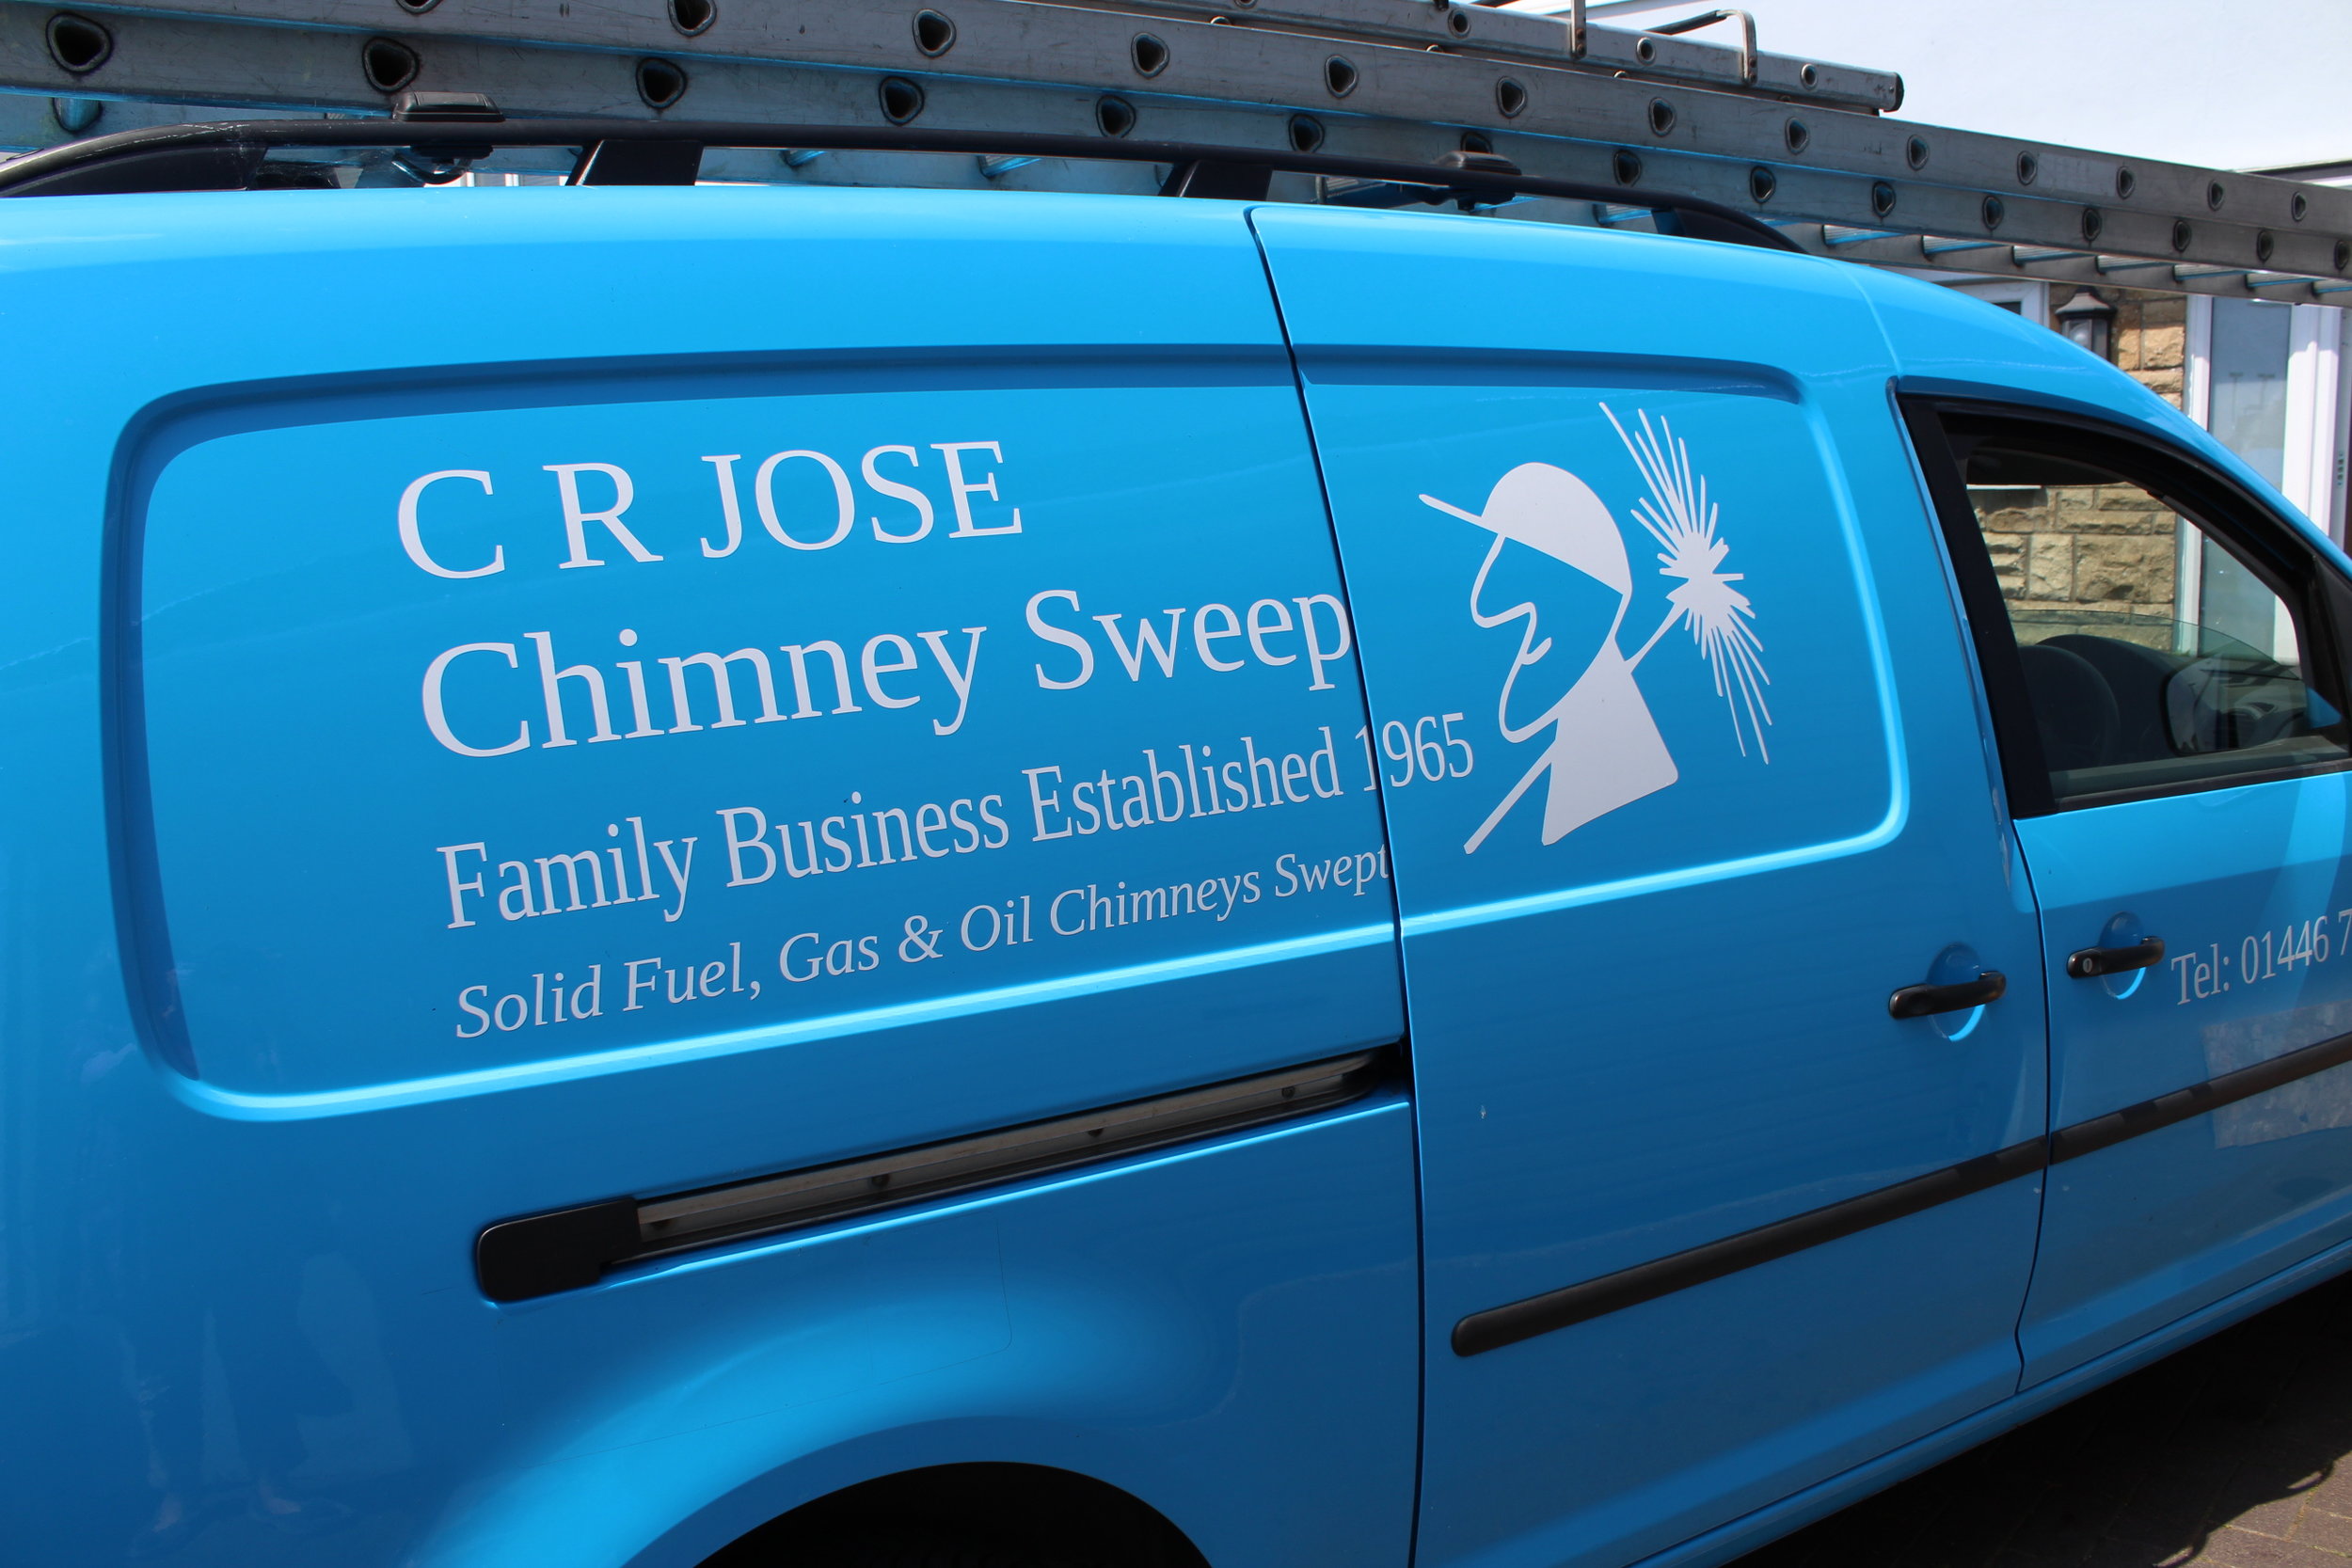 C R Jose Chimney Sweep South Wales Sweeping